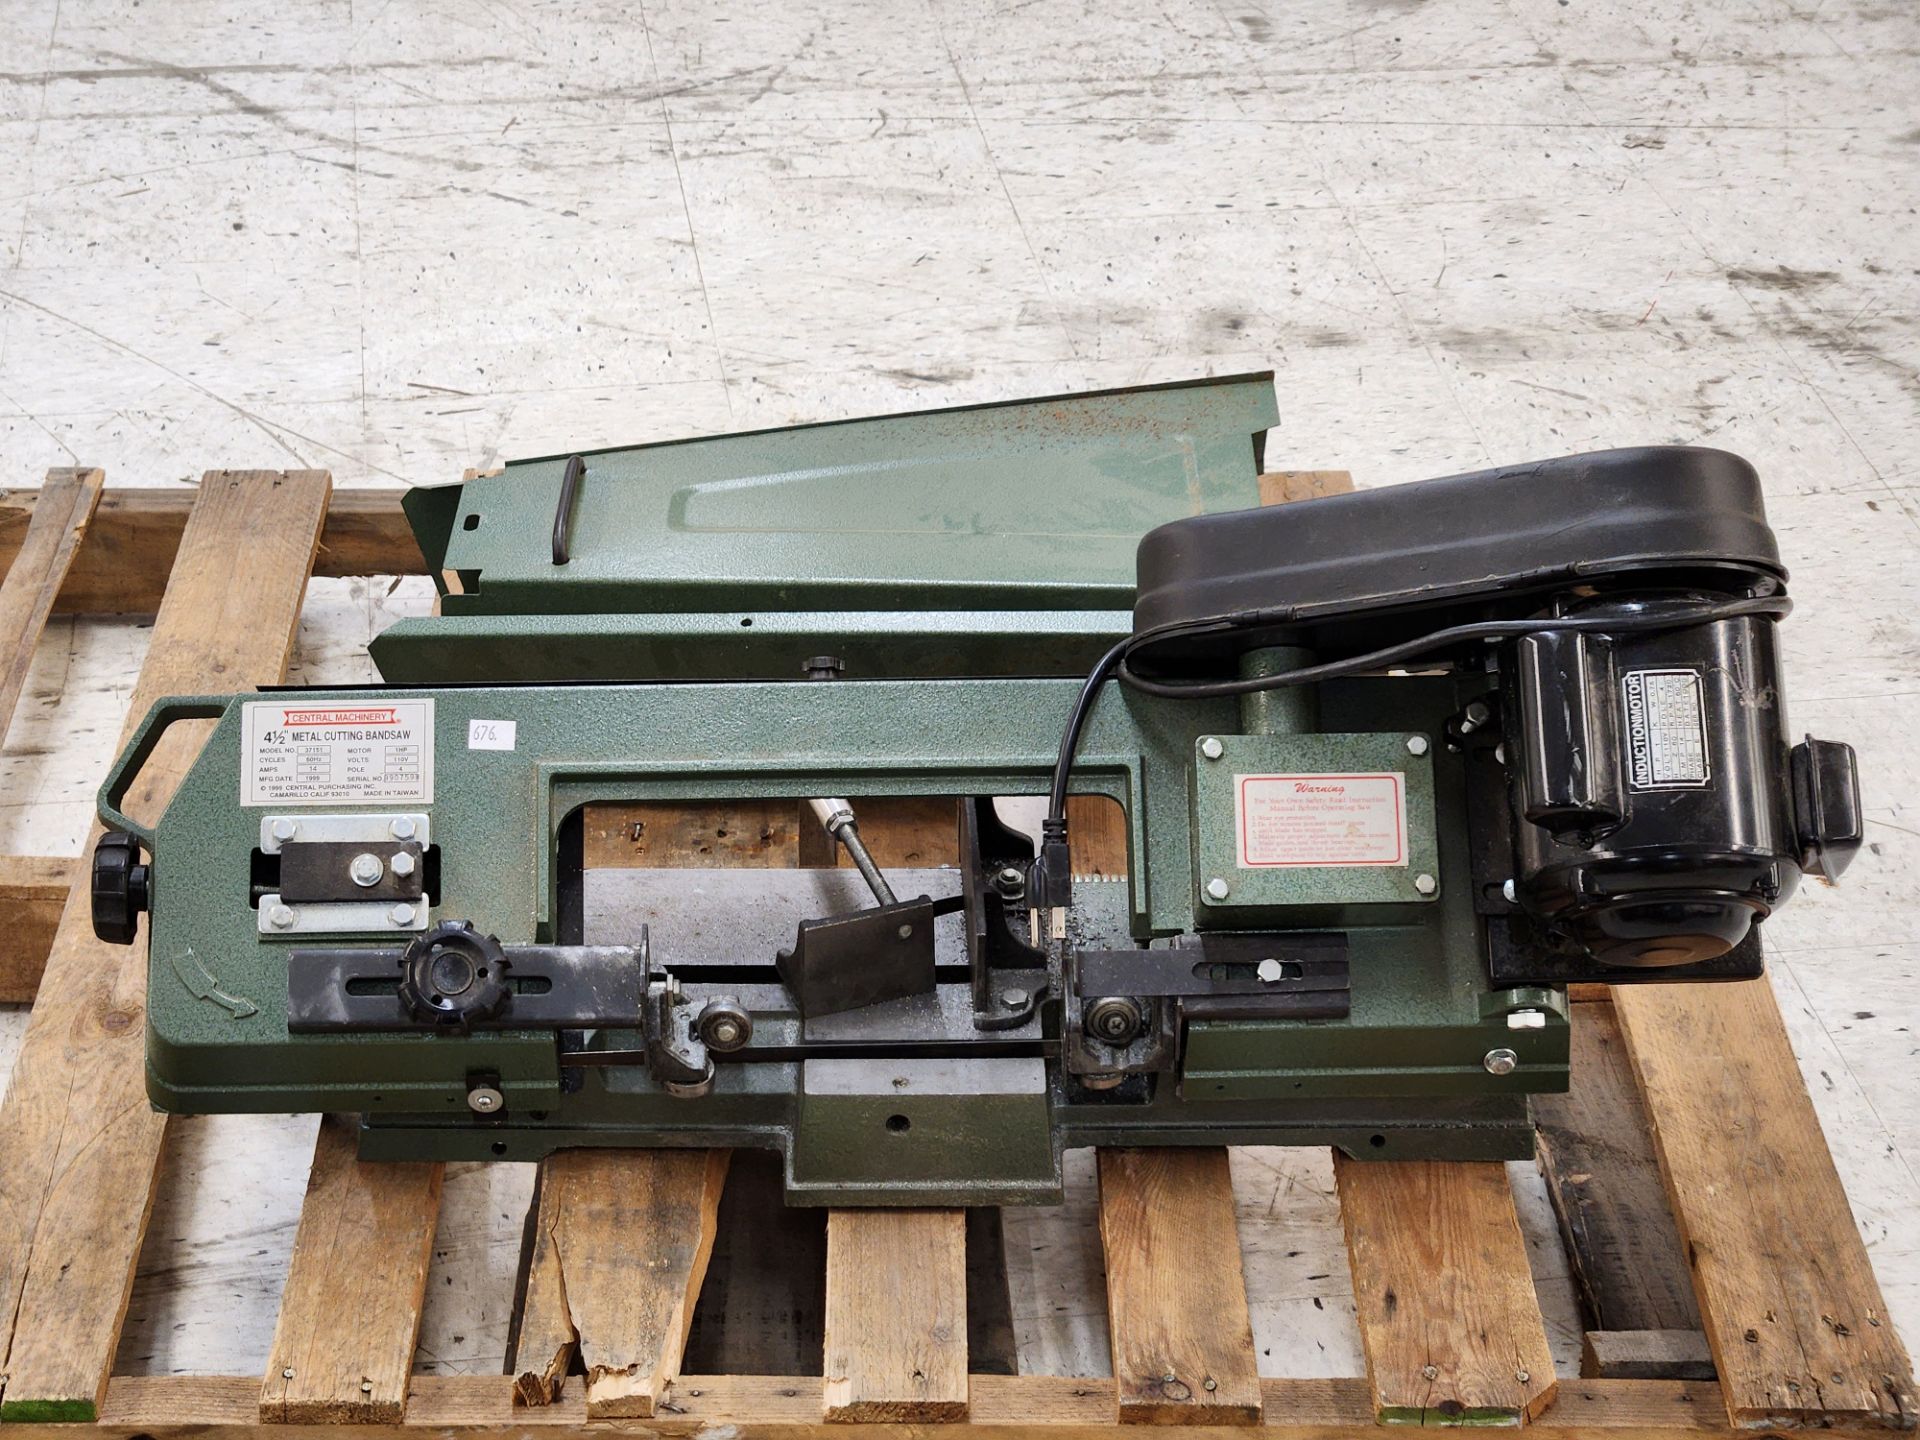 Central Machinery 4-1/2" Metal Cutting Bandsaw